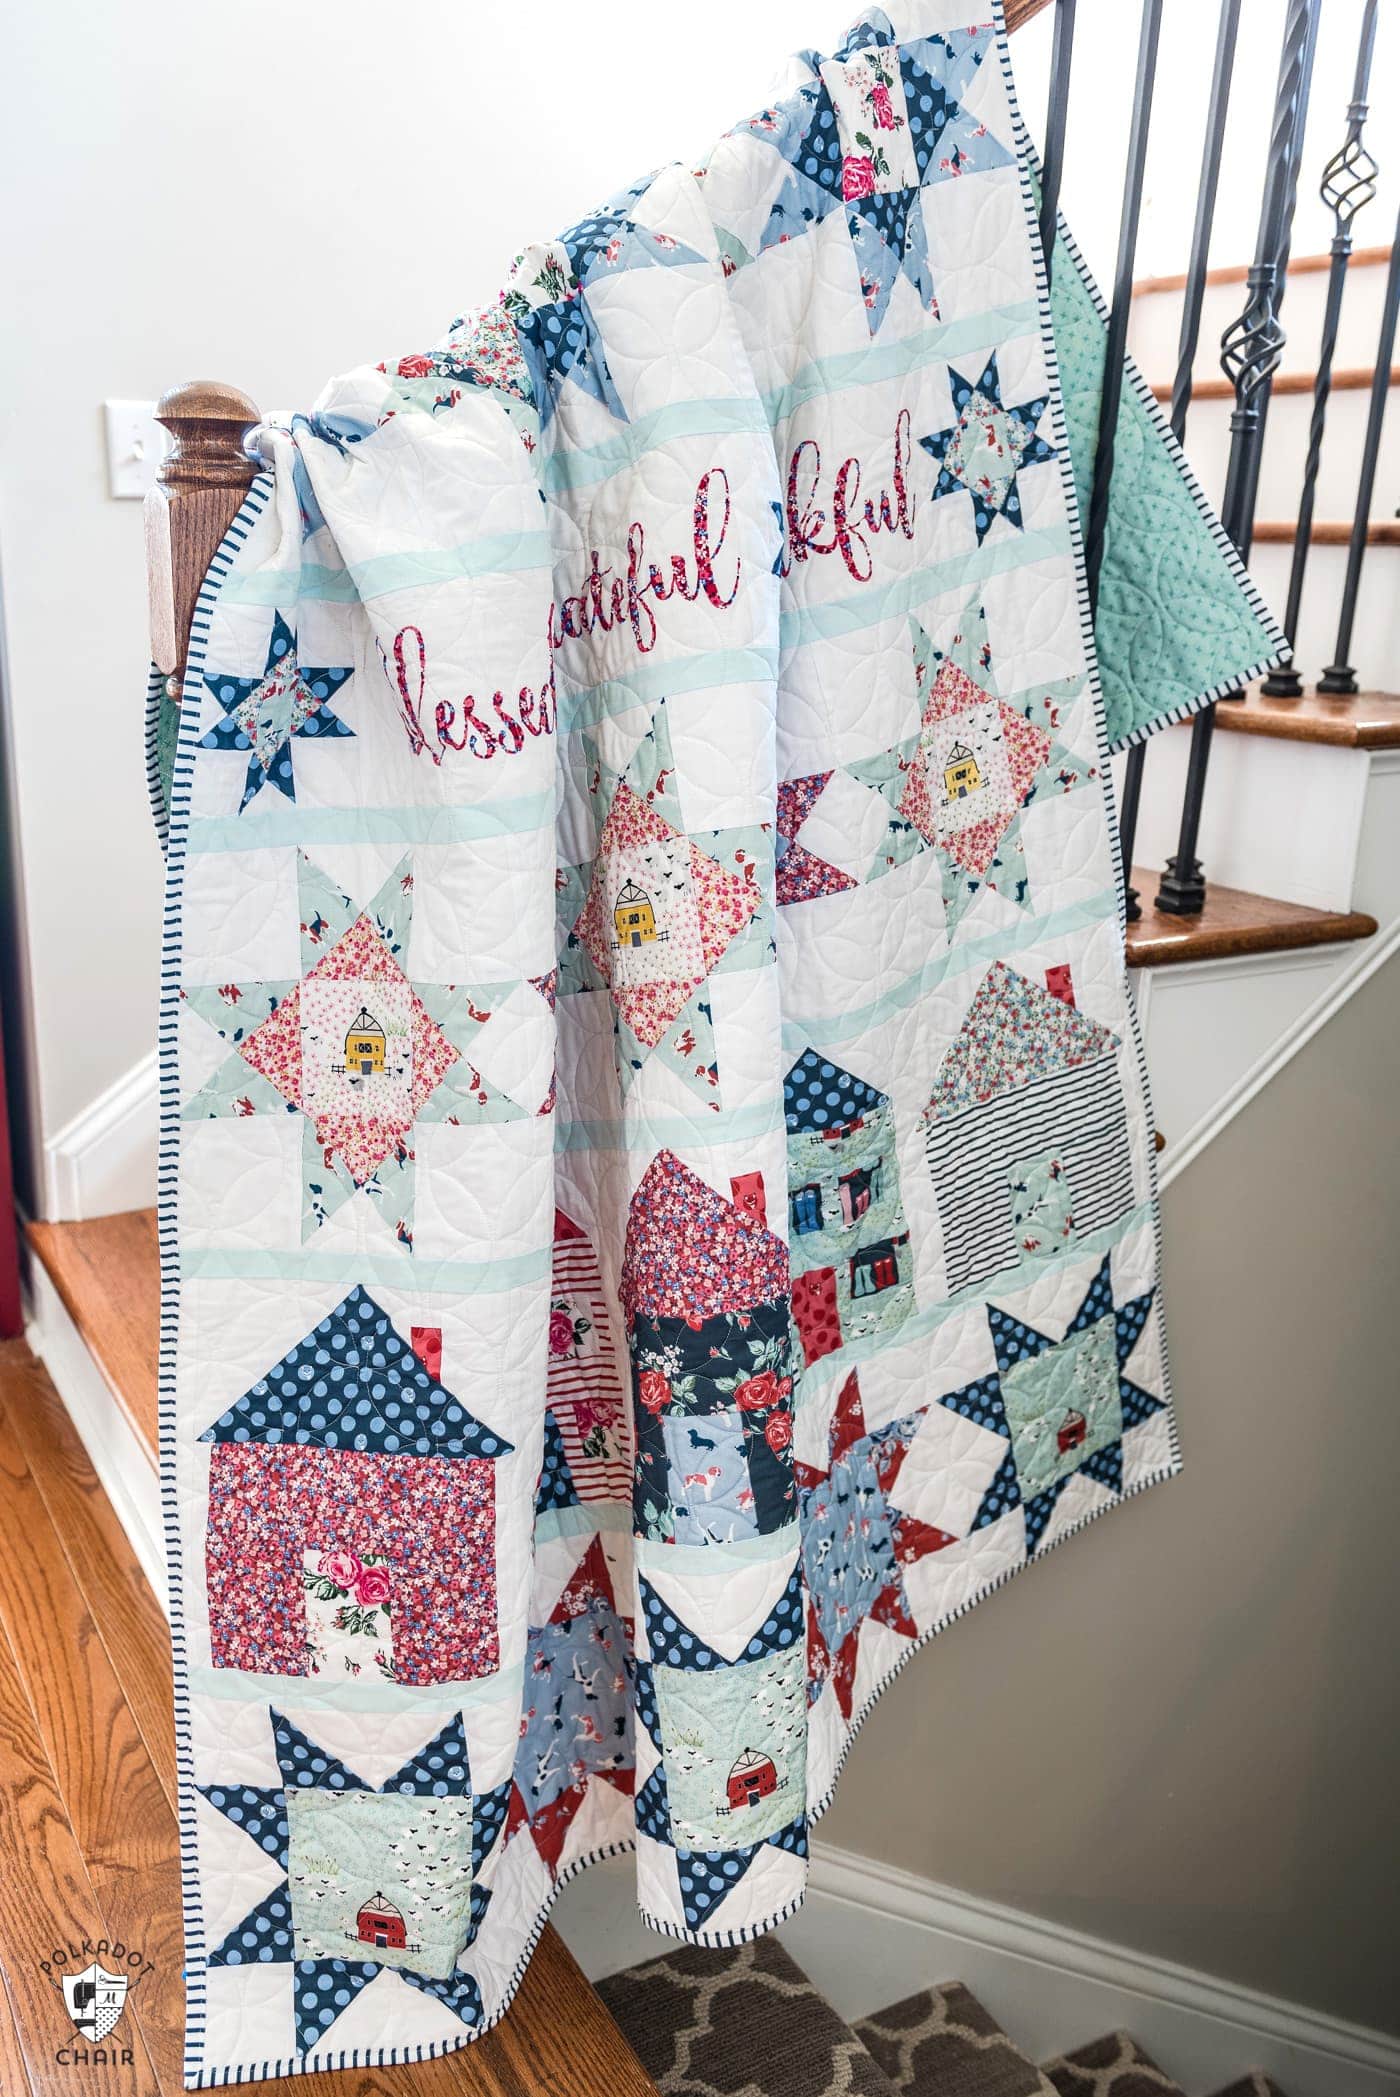 Introducing the Let’s Stay Home Quilt Pattern